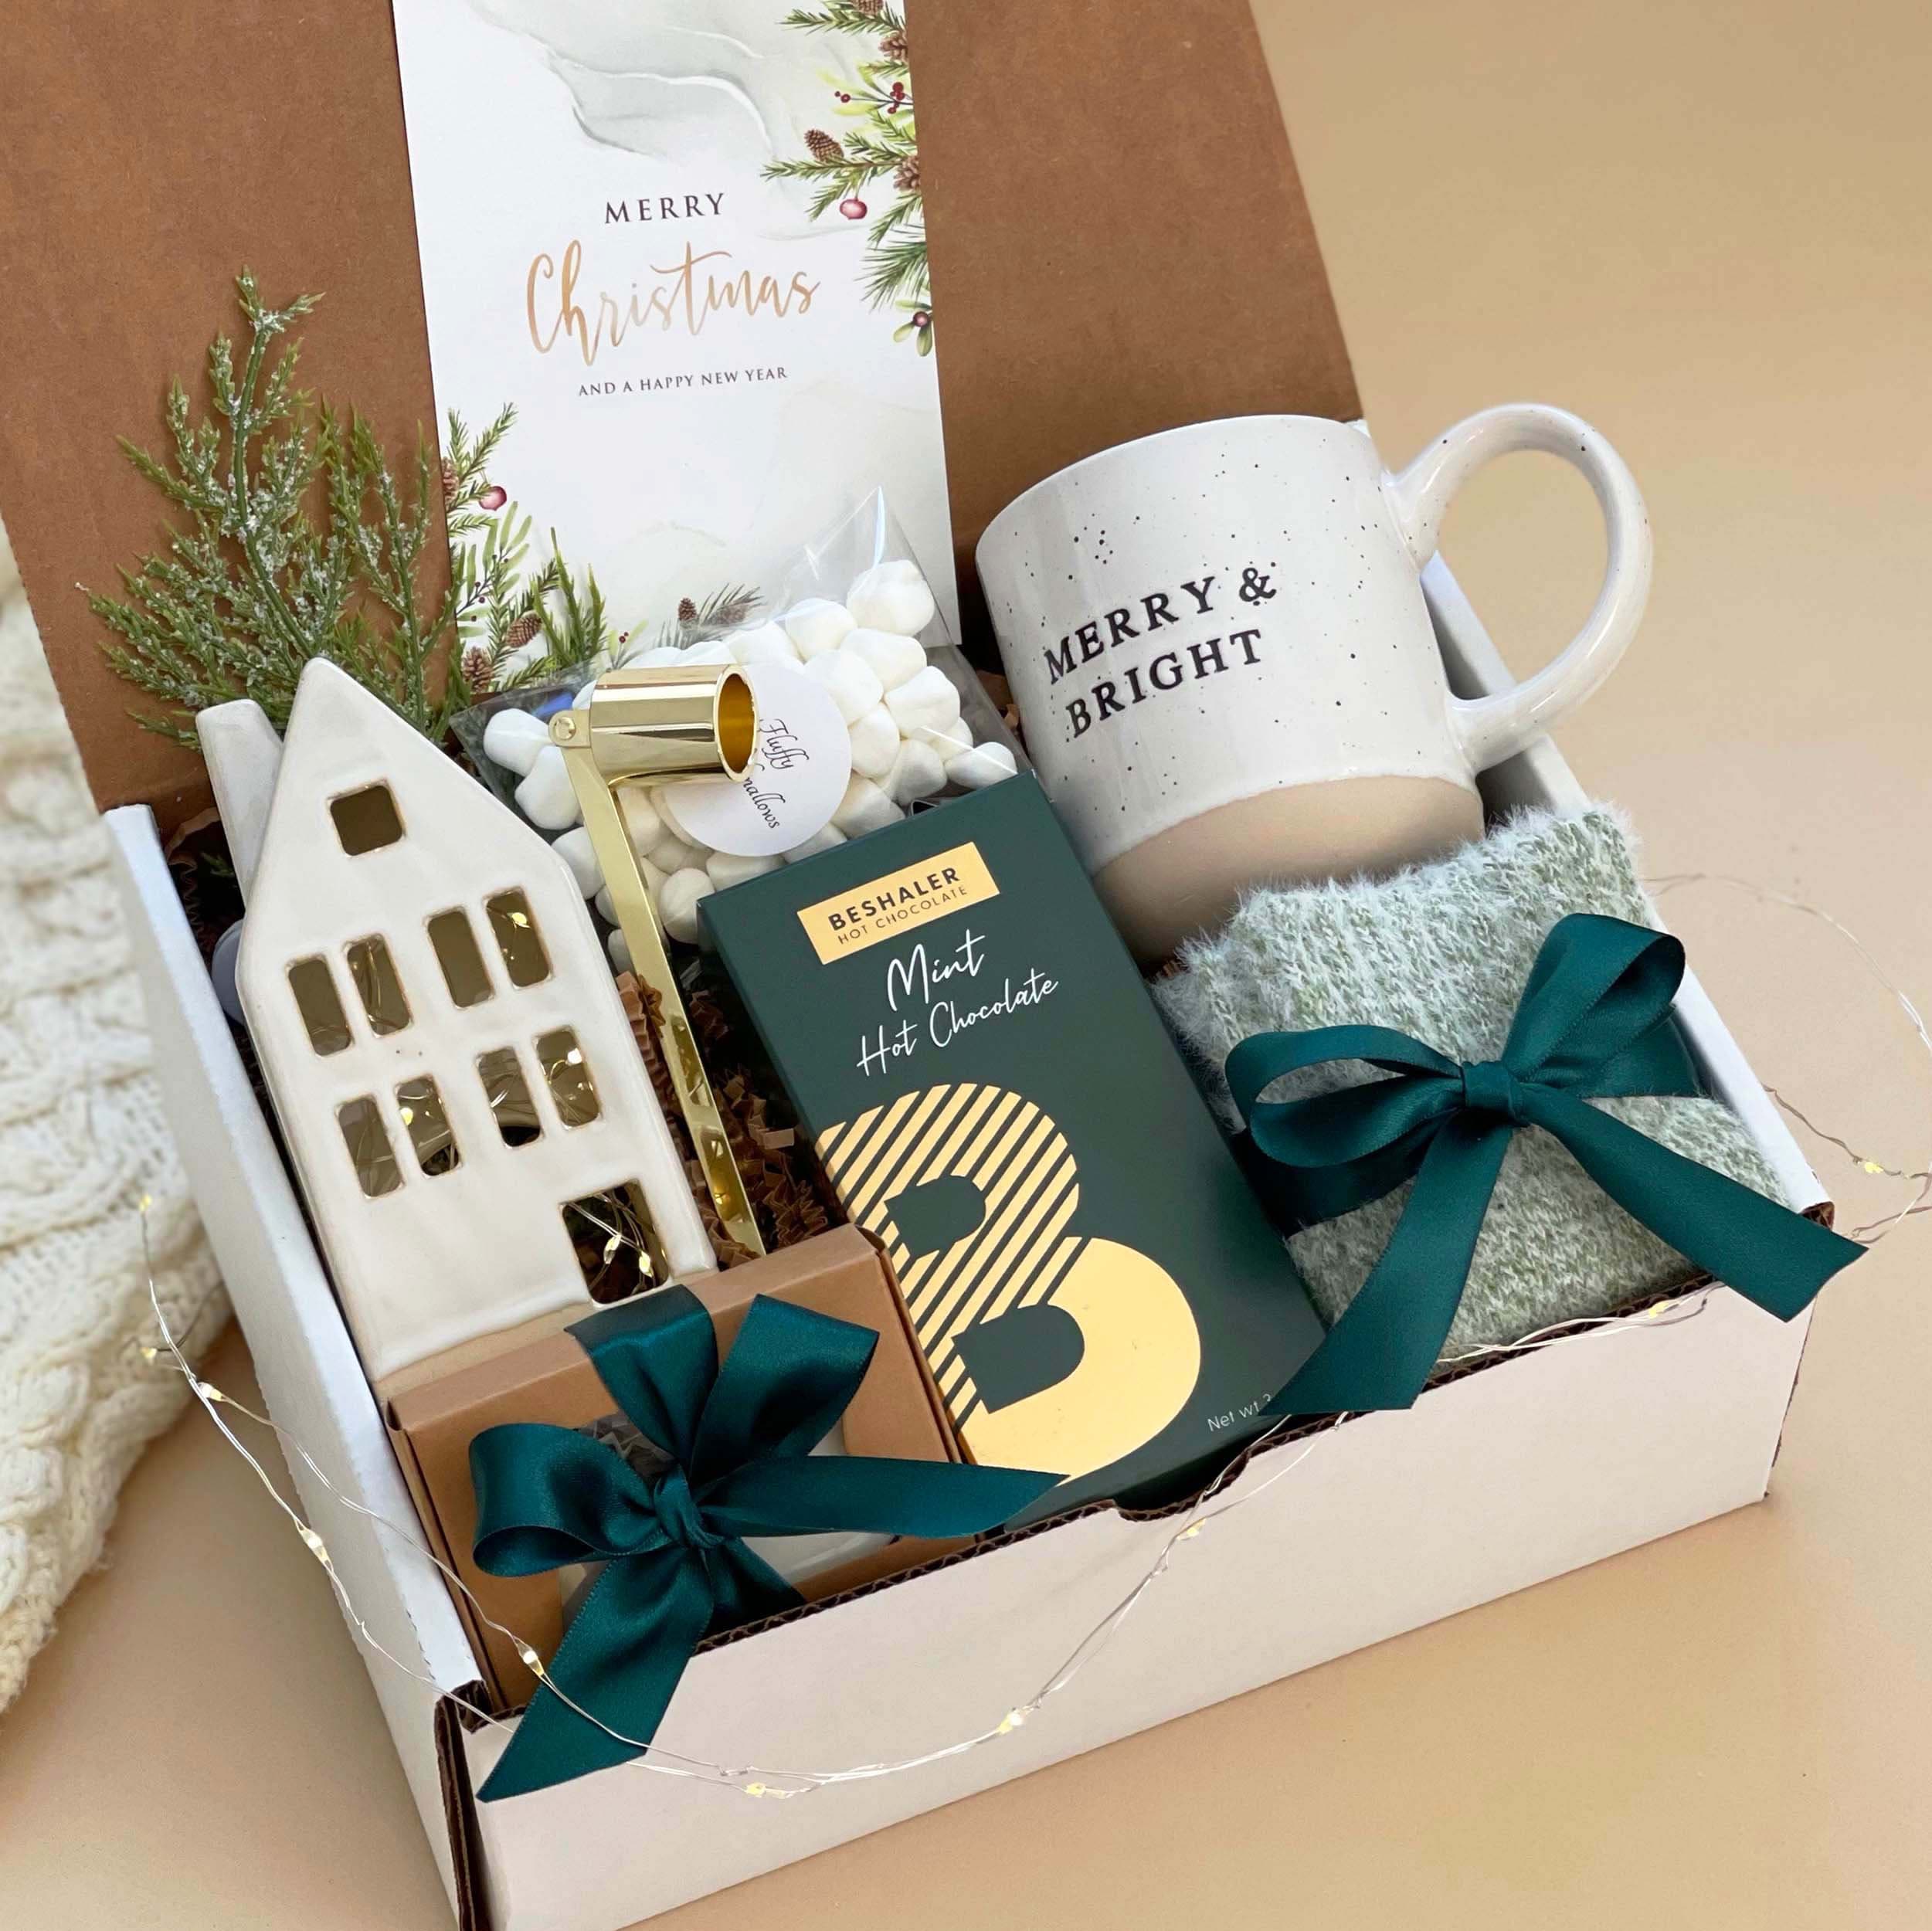 Christmas Gift Kit Ideas - Organize and Decorate Everything